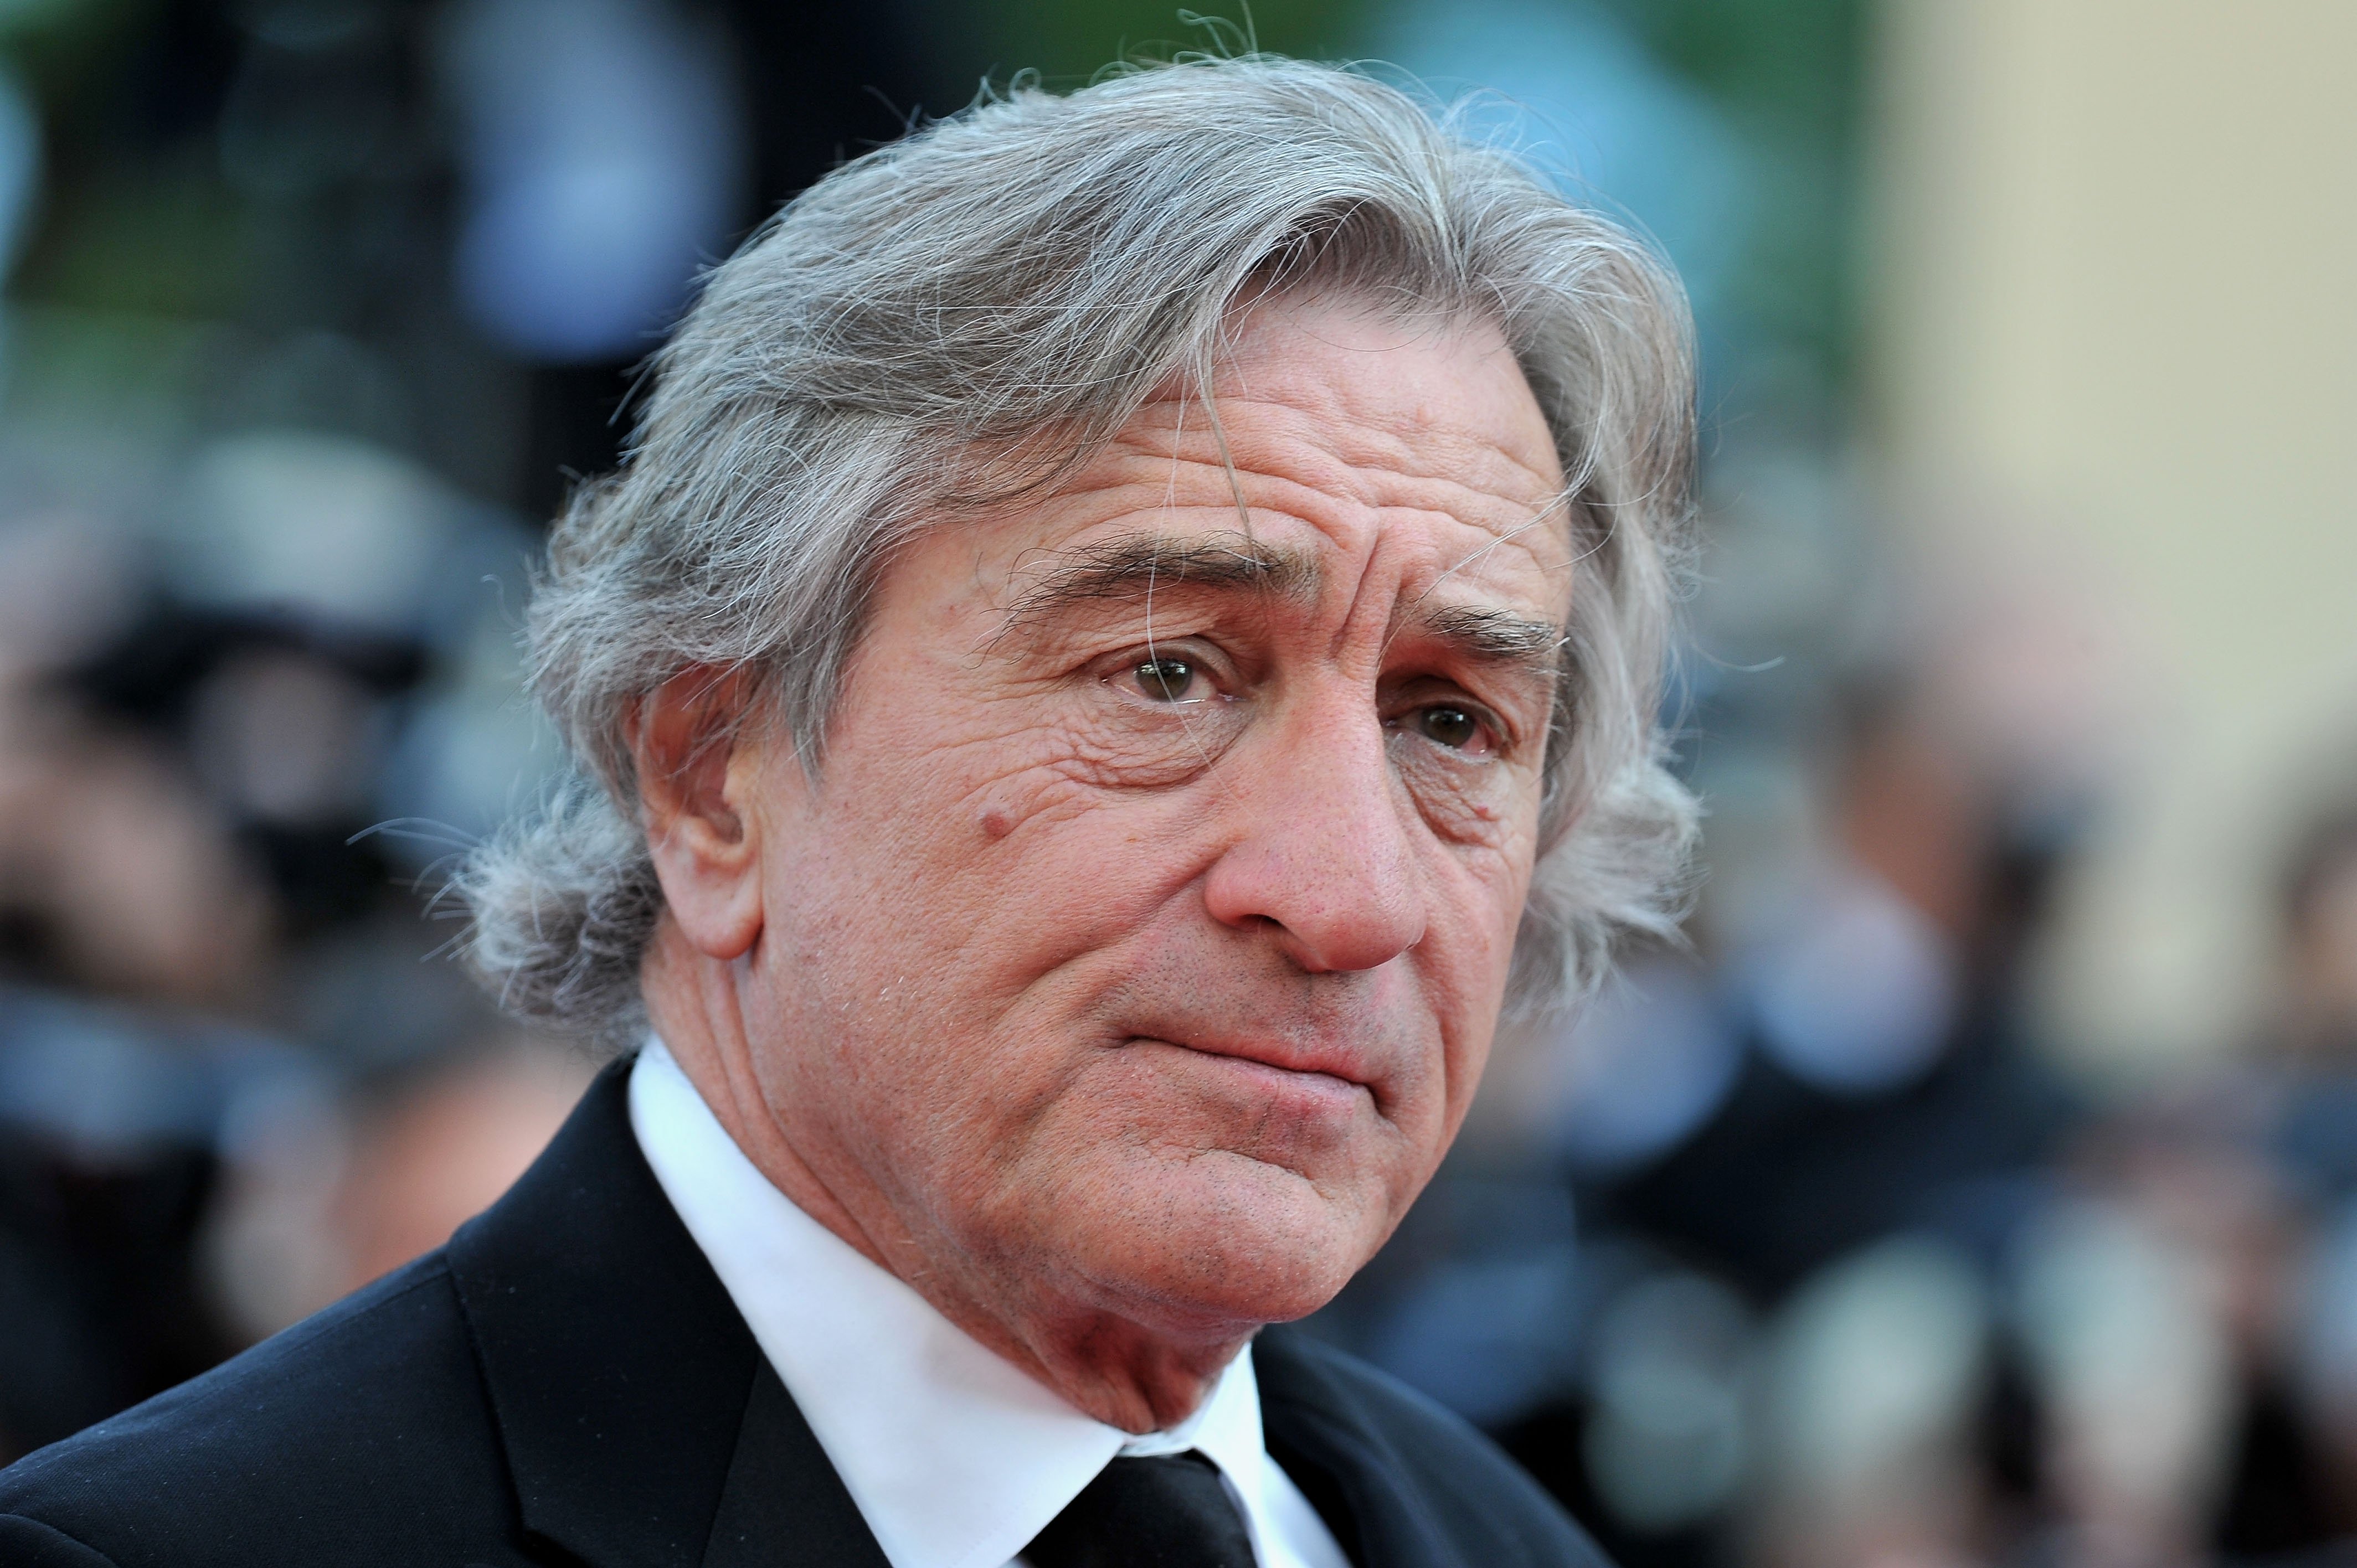  Actor Robert De Niro attends the 'Once Upon A Time' Premiere during 65th Annual Cannes Film Festival during at Palais des Festivals on May 18, 2012 in Cannes, France | Source: Getty Images